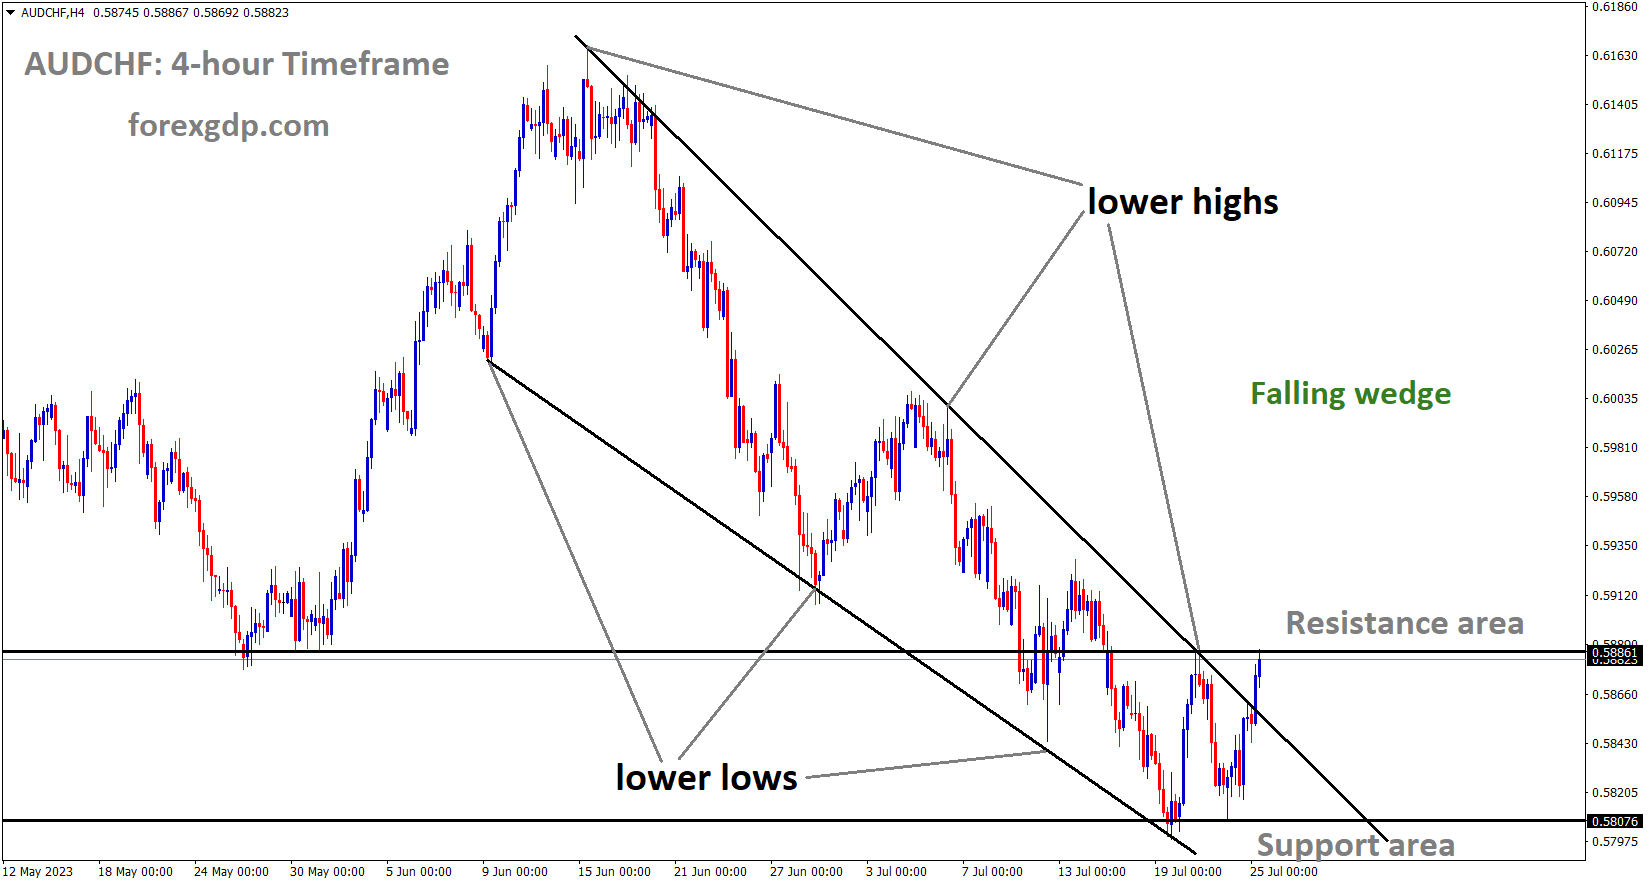 AUDCHF is moving in the Falling wedge pattern and the market has reached the lower high area of the pattern